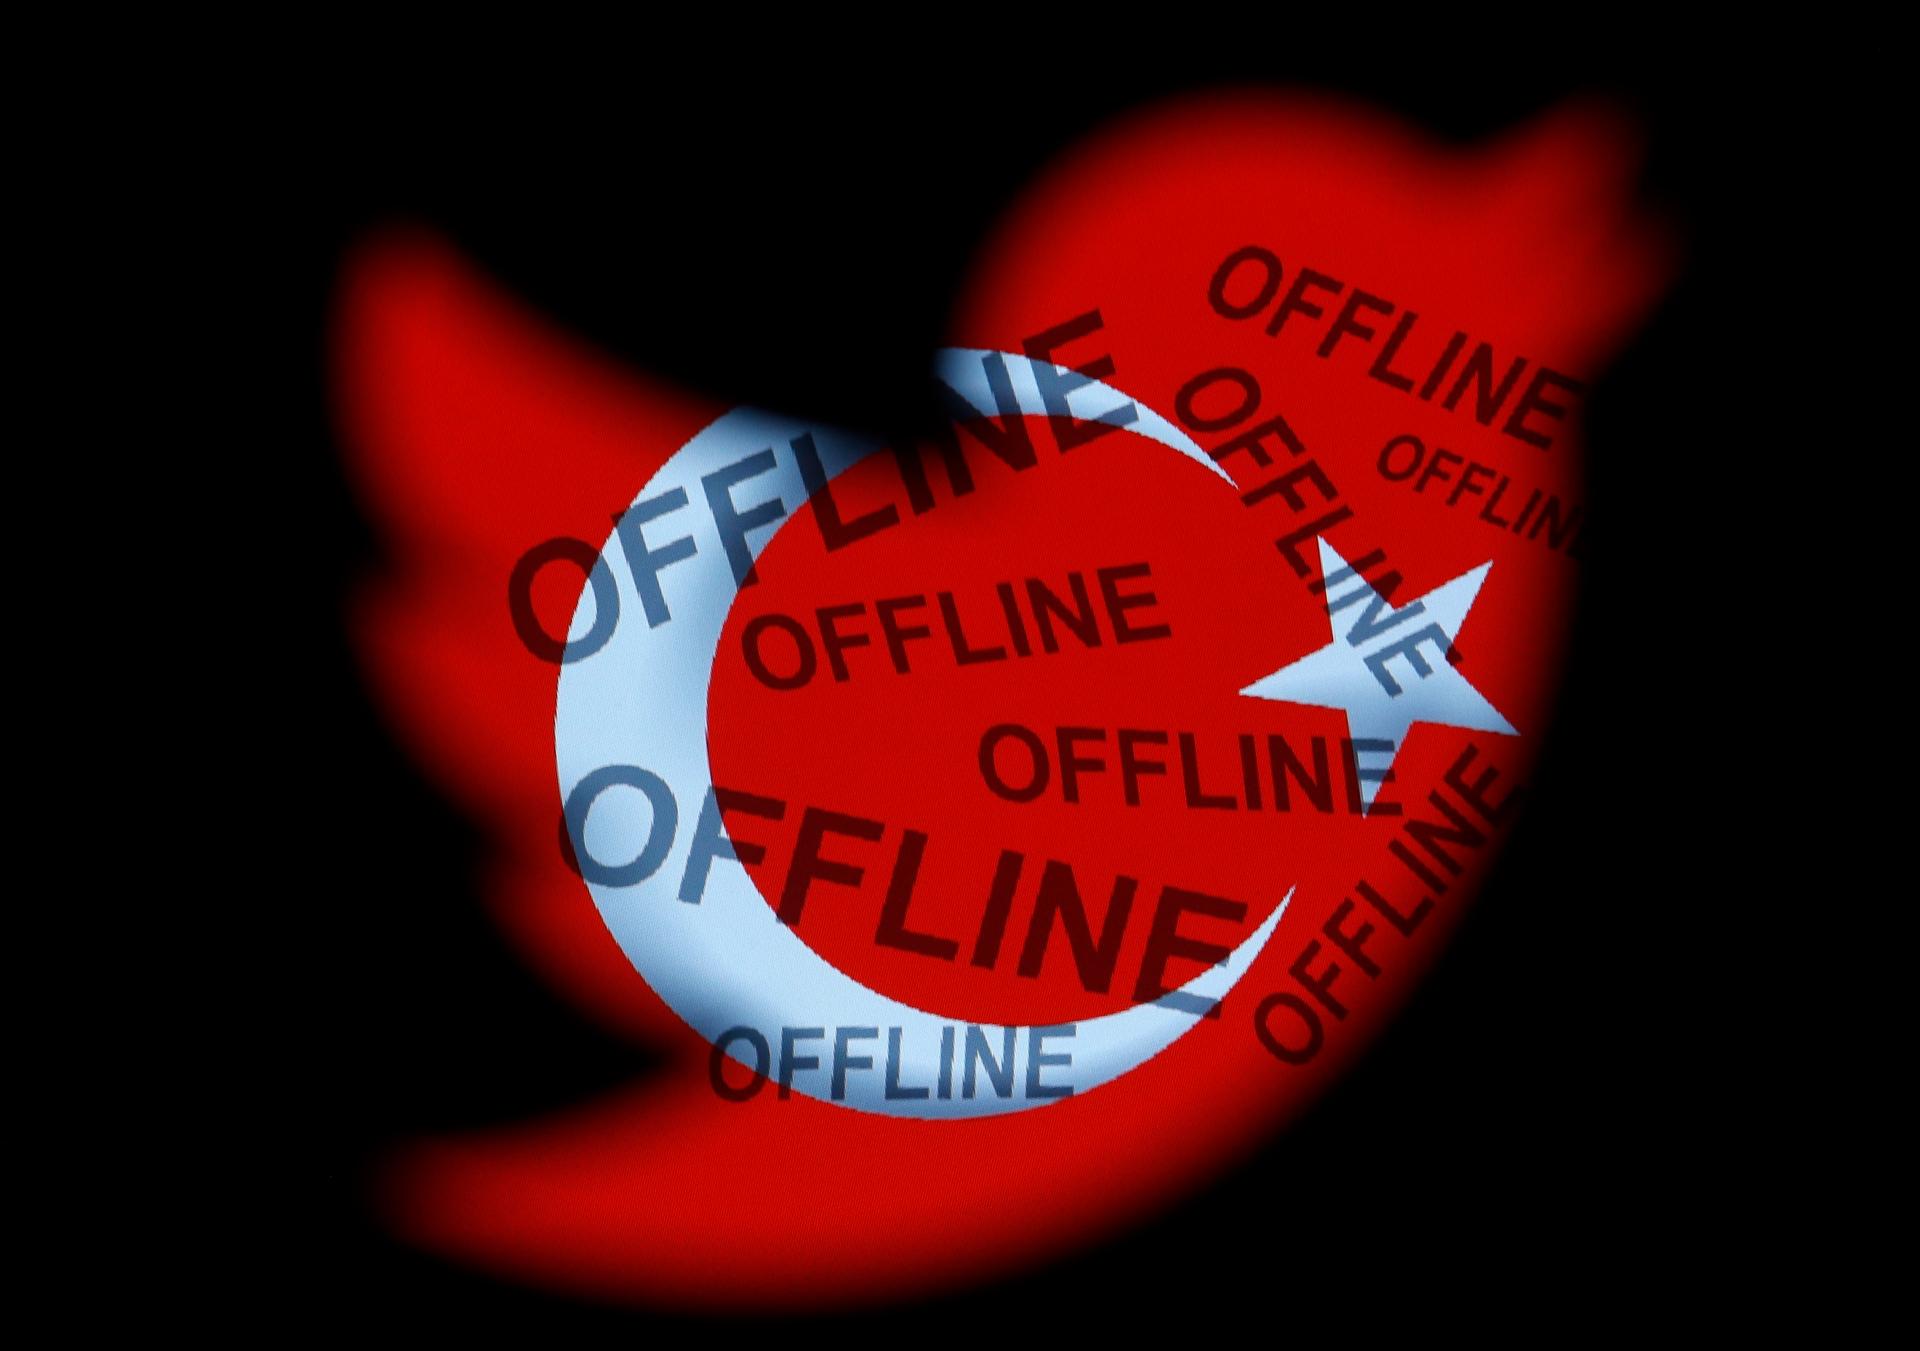 A Turkish national flag with the word 'offline' projected on it, is seen through a Twitter logo in this photo illustration taken in Zenica, March 21, 2014.